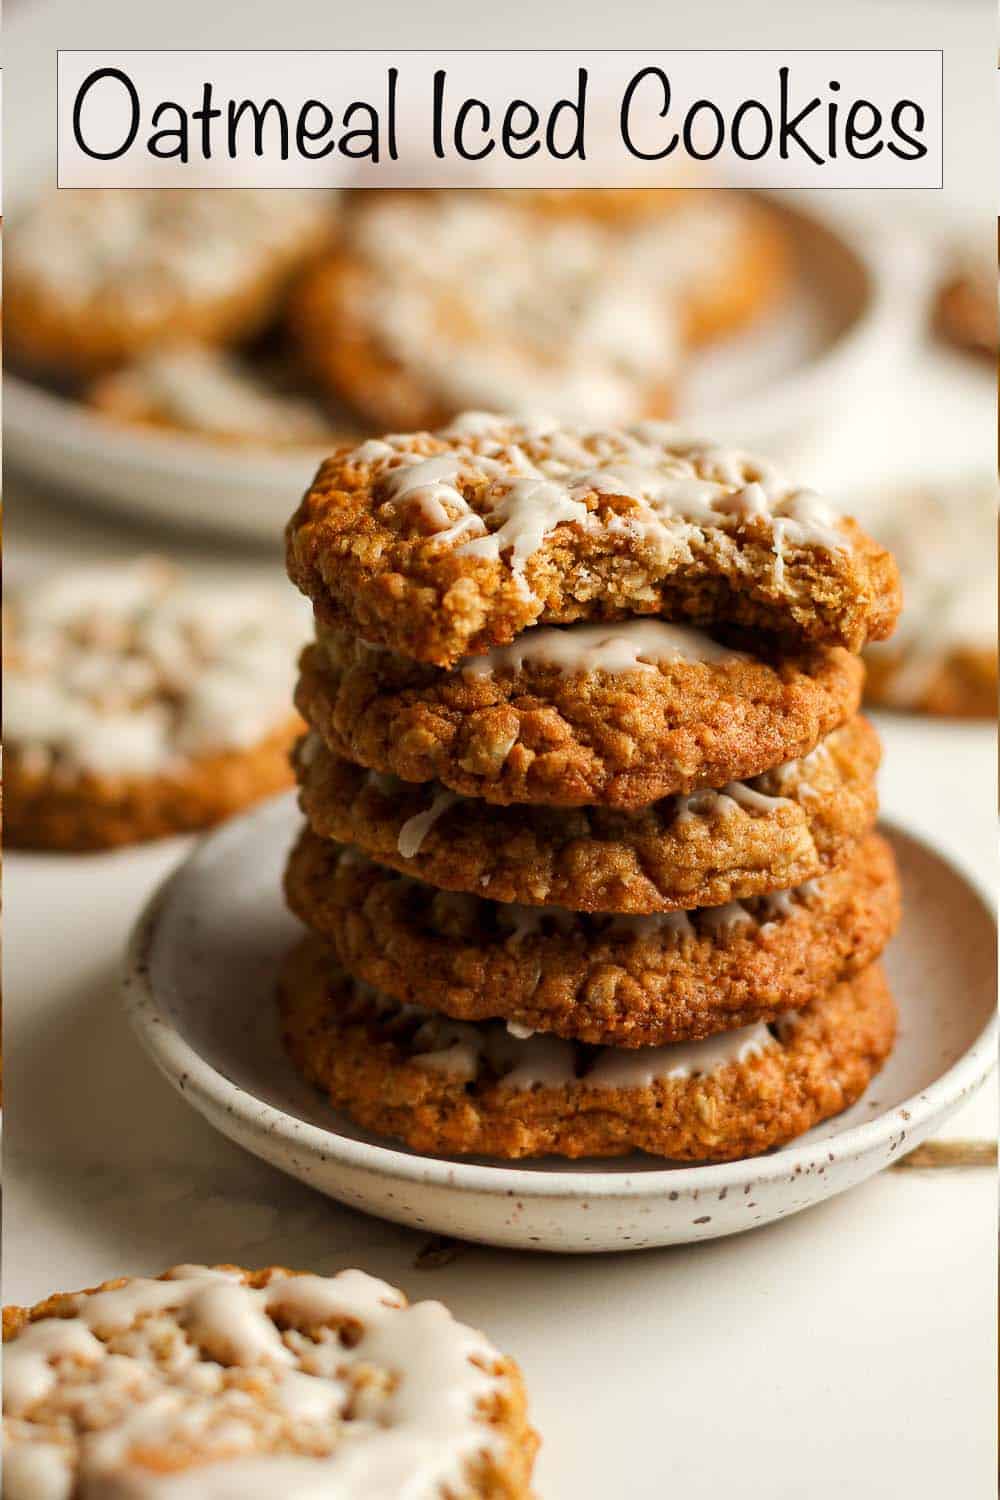 A stack of oatmeal iced cookies on a plate.